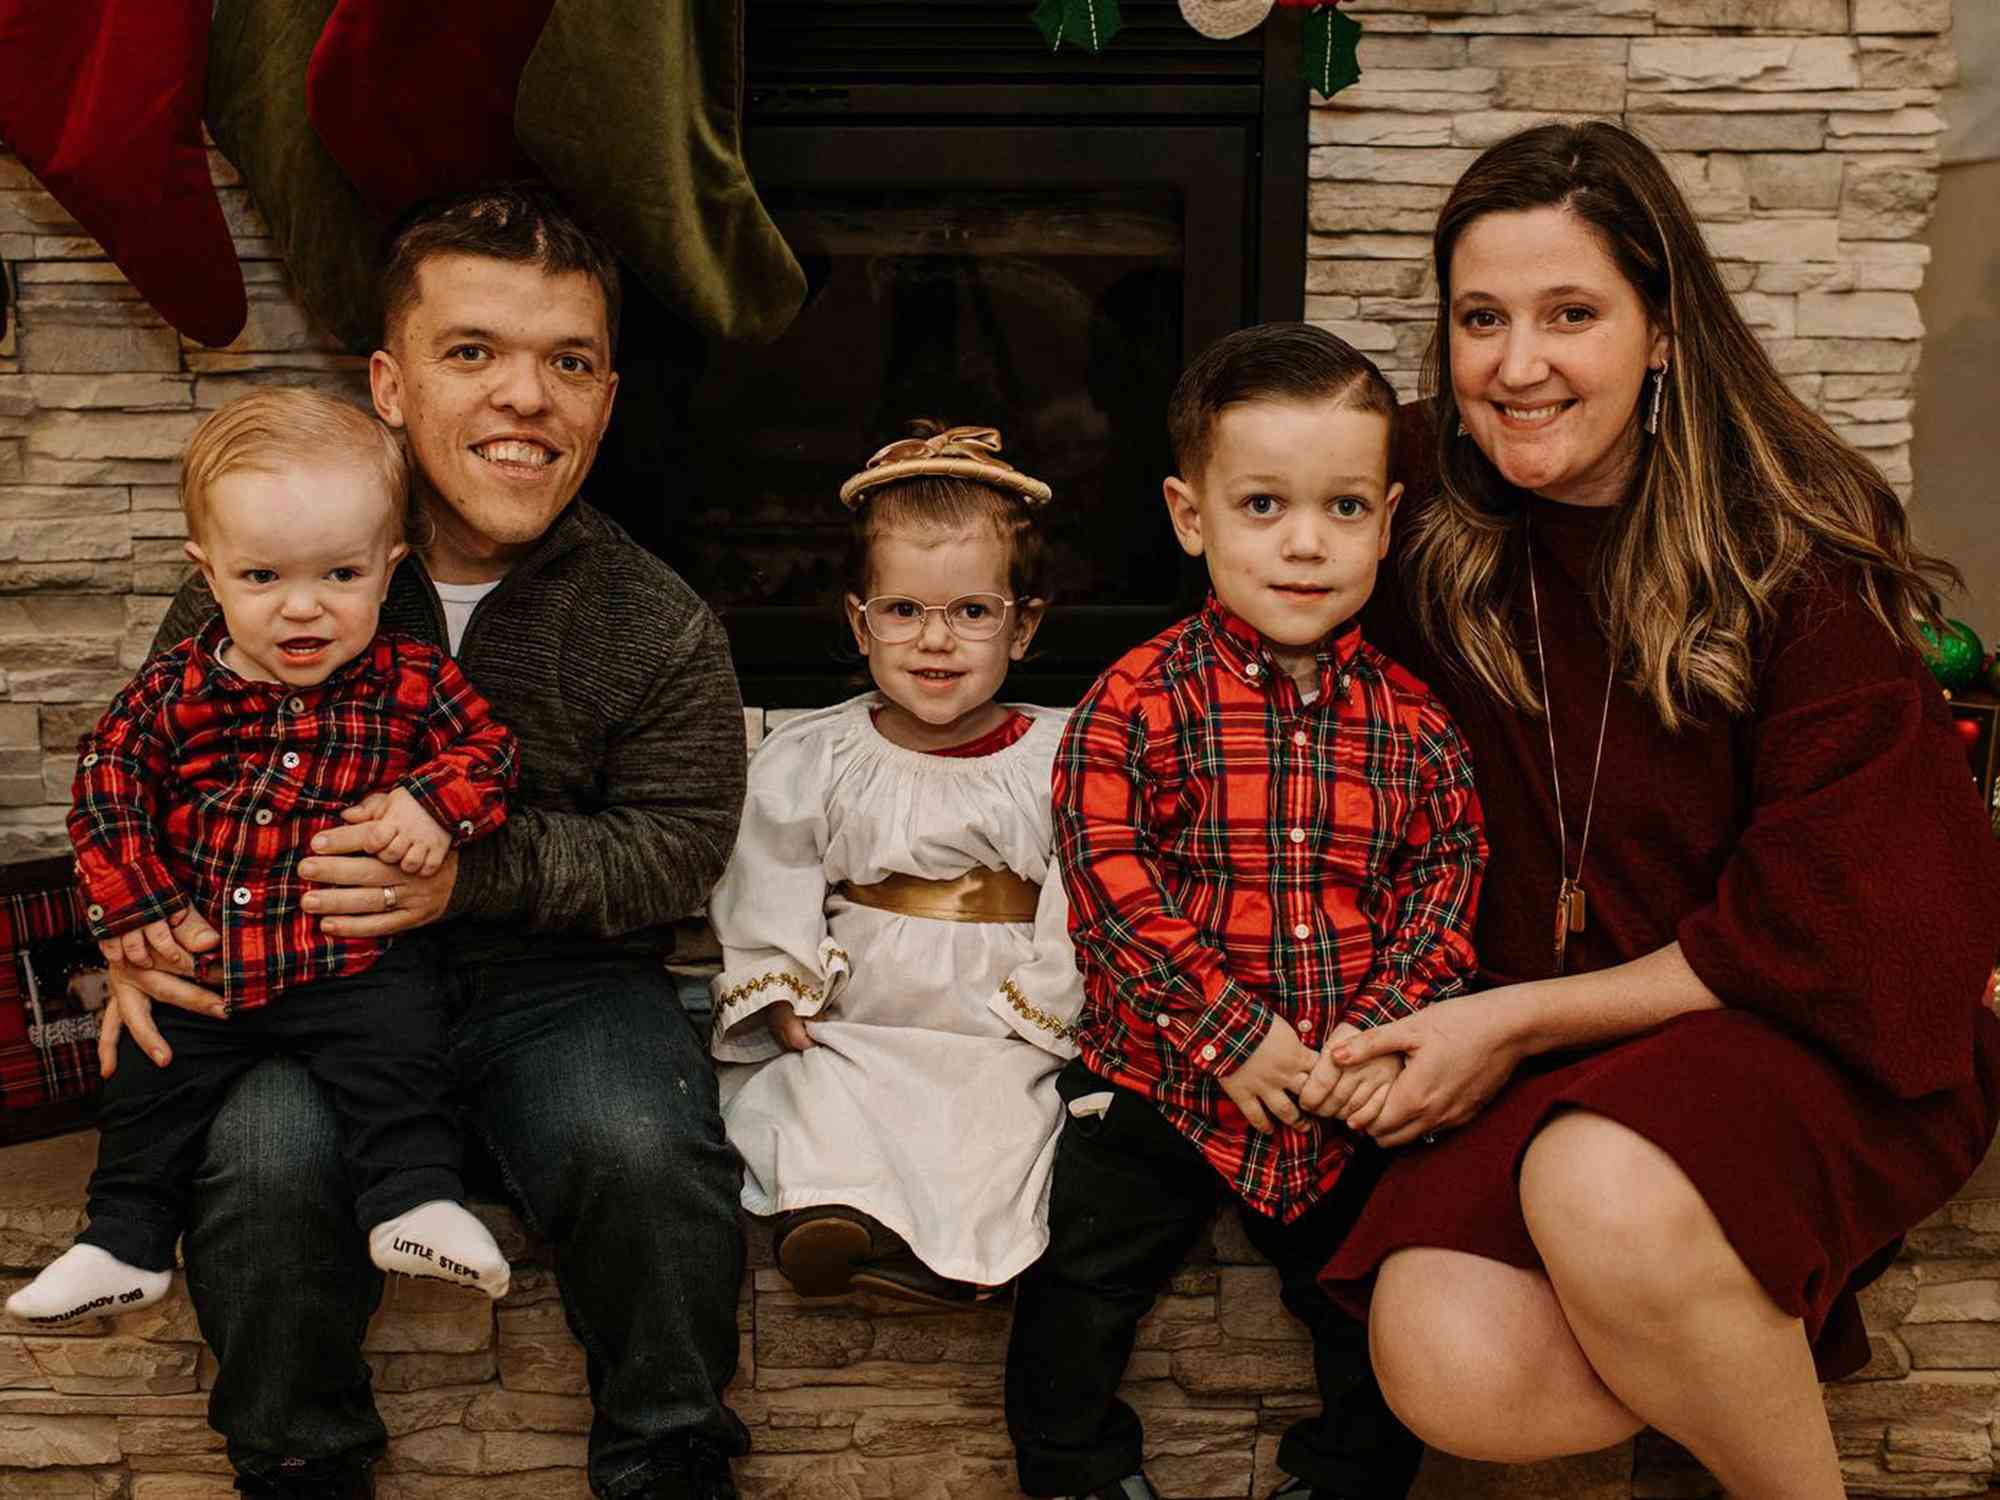 “LPBW”'s Tori Roloff Admits She Feels 'Nervous' About Daughter's Upcoming Surgery to Treat 'Severe' Sleep Apnea